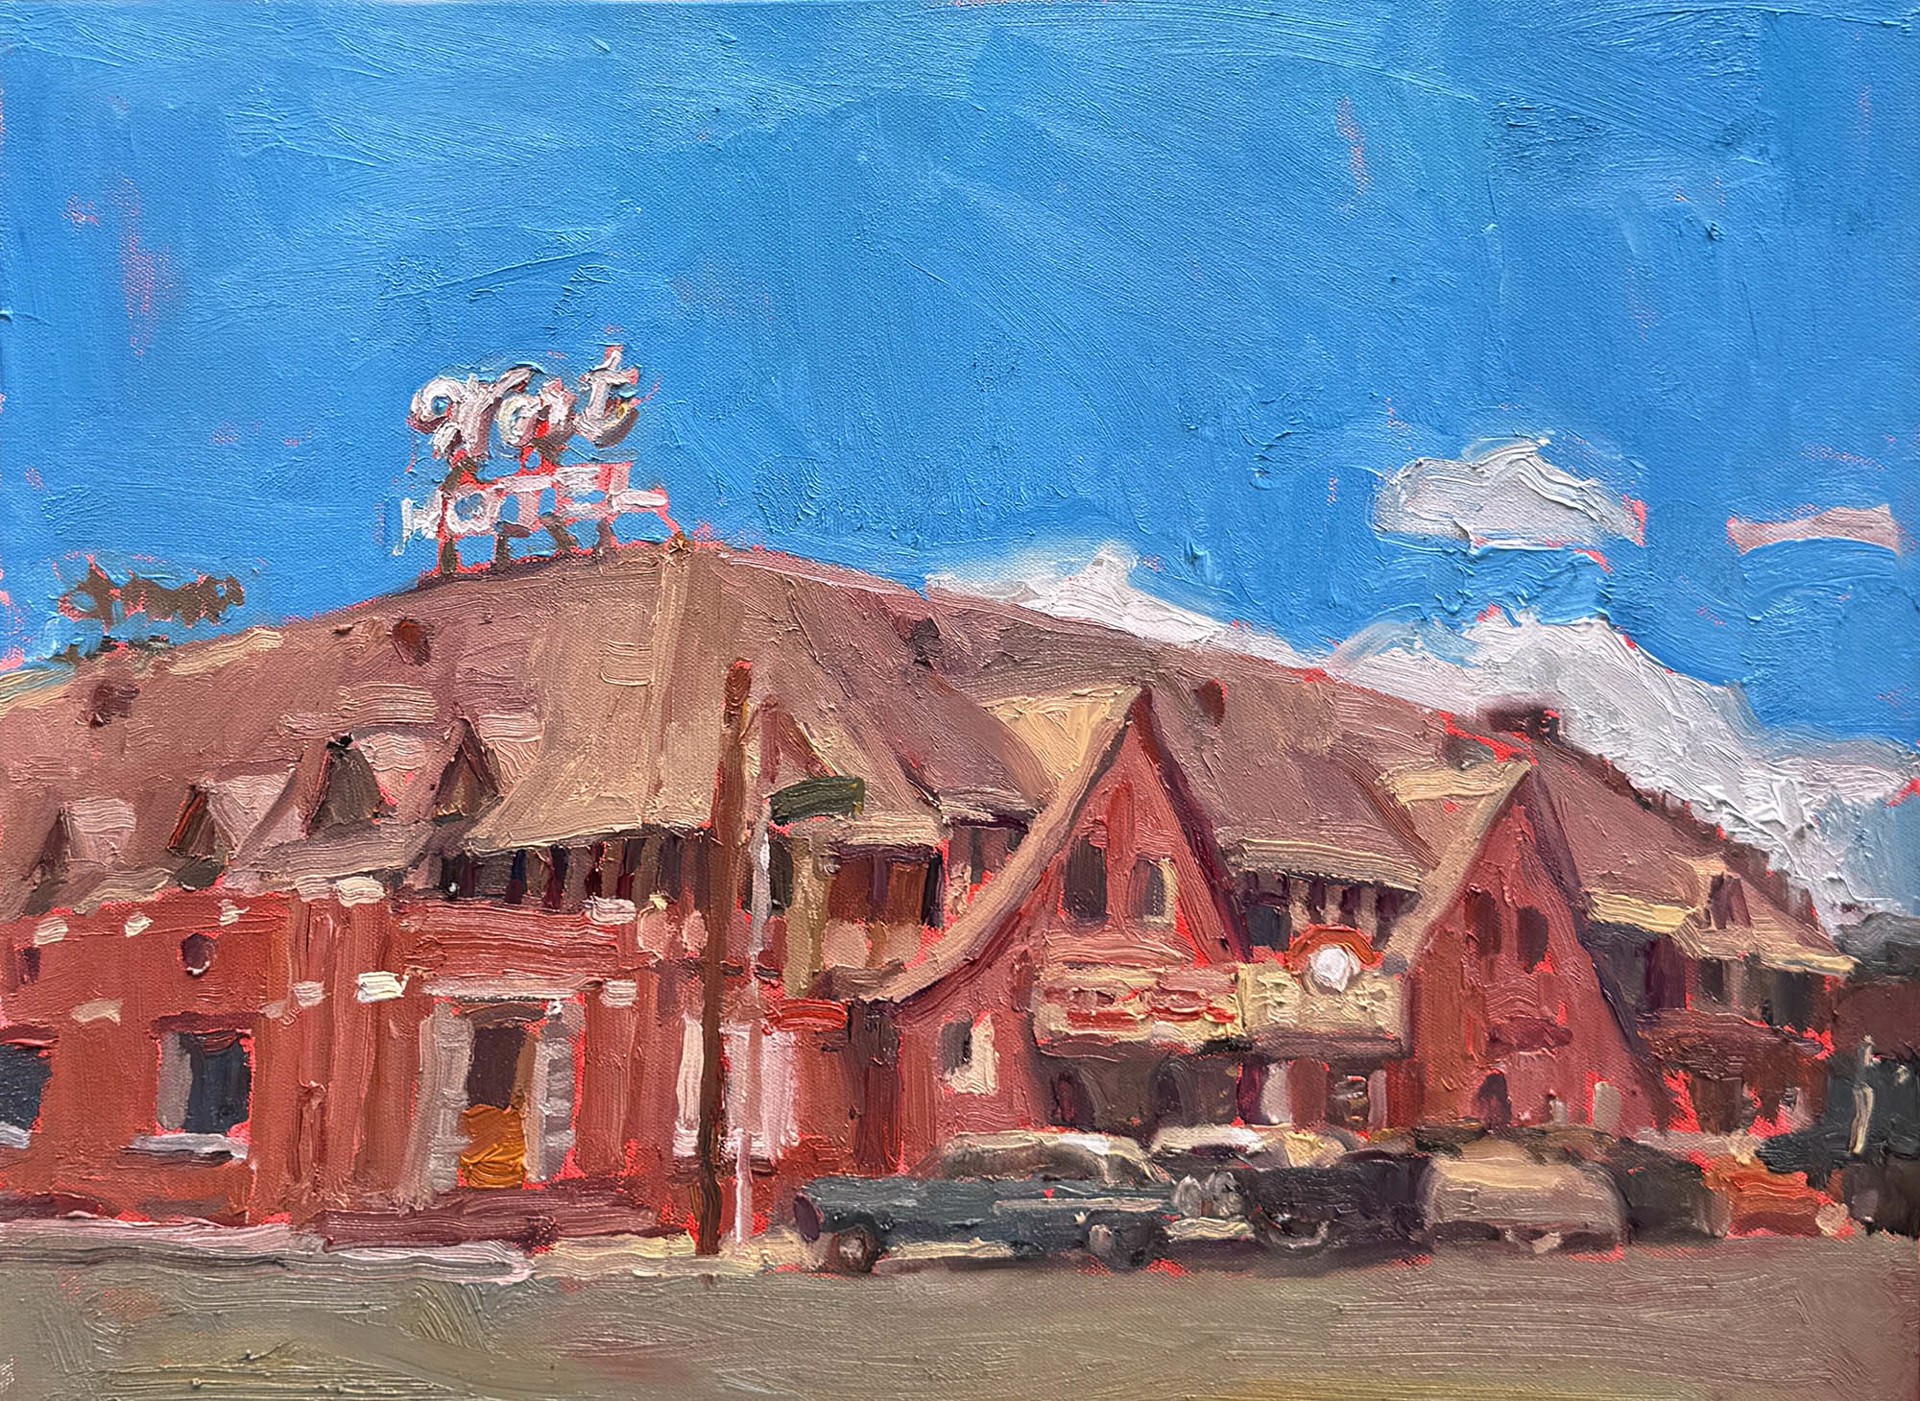 Original Oil On Canvas By Aaron Hazel Featuring The Wort Hotel